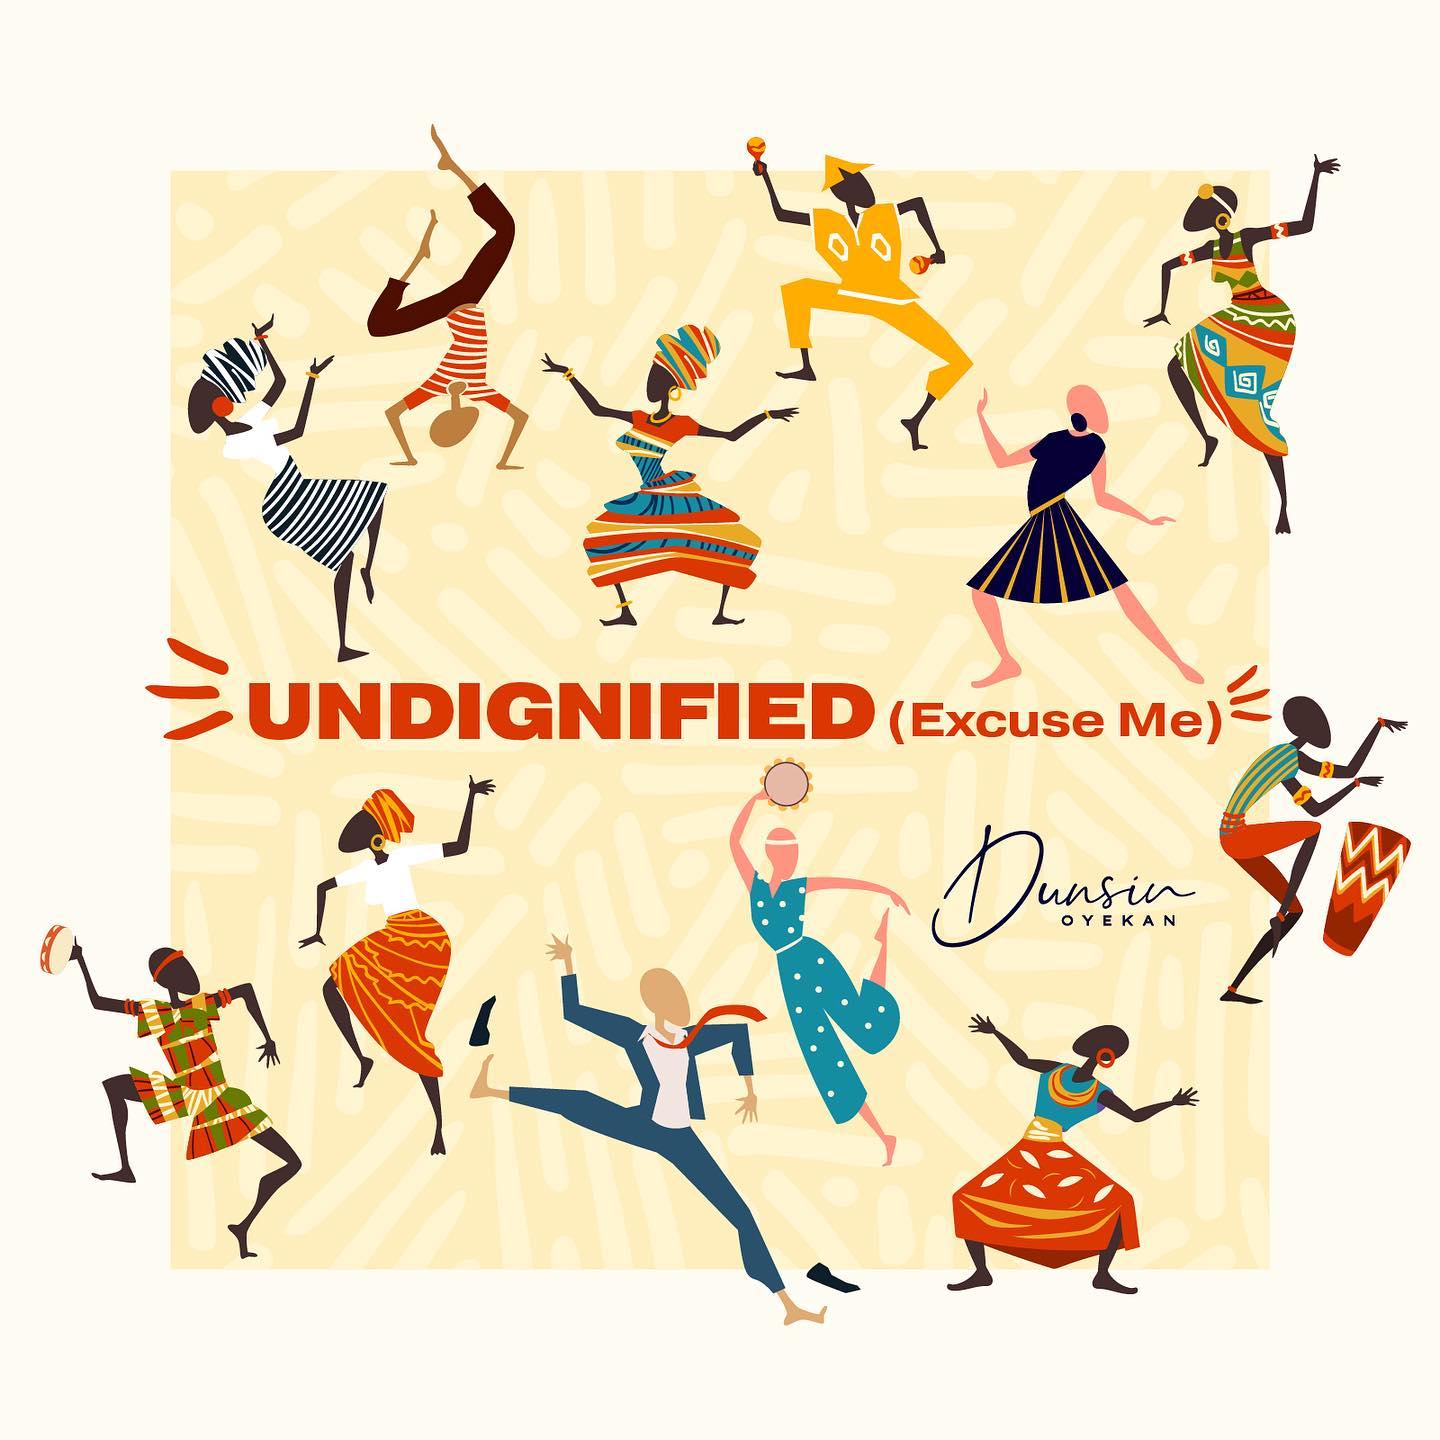 New Music + Video: Dunsin Oyekan – Undignified (Excuse Me)